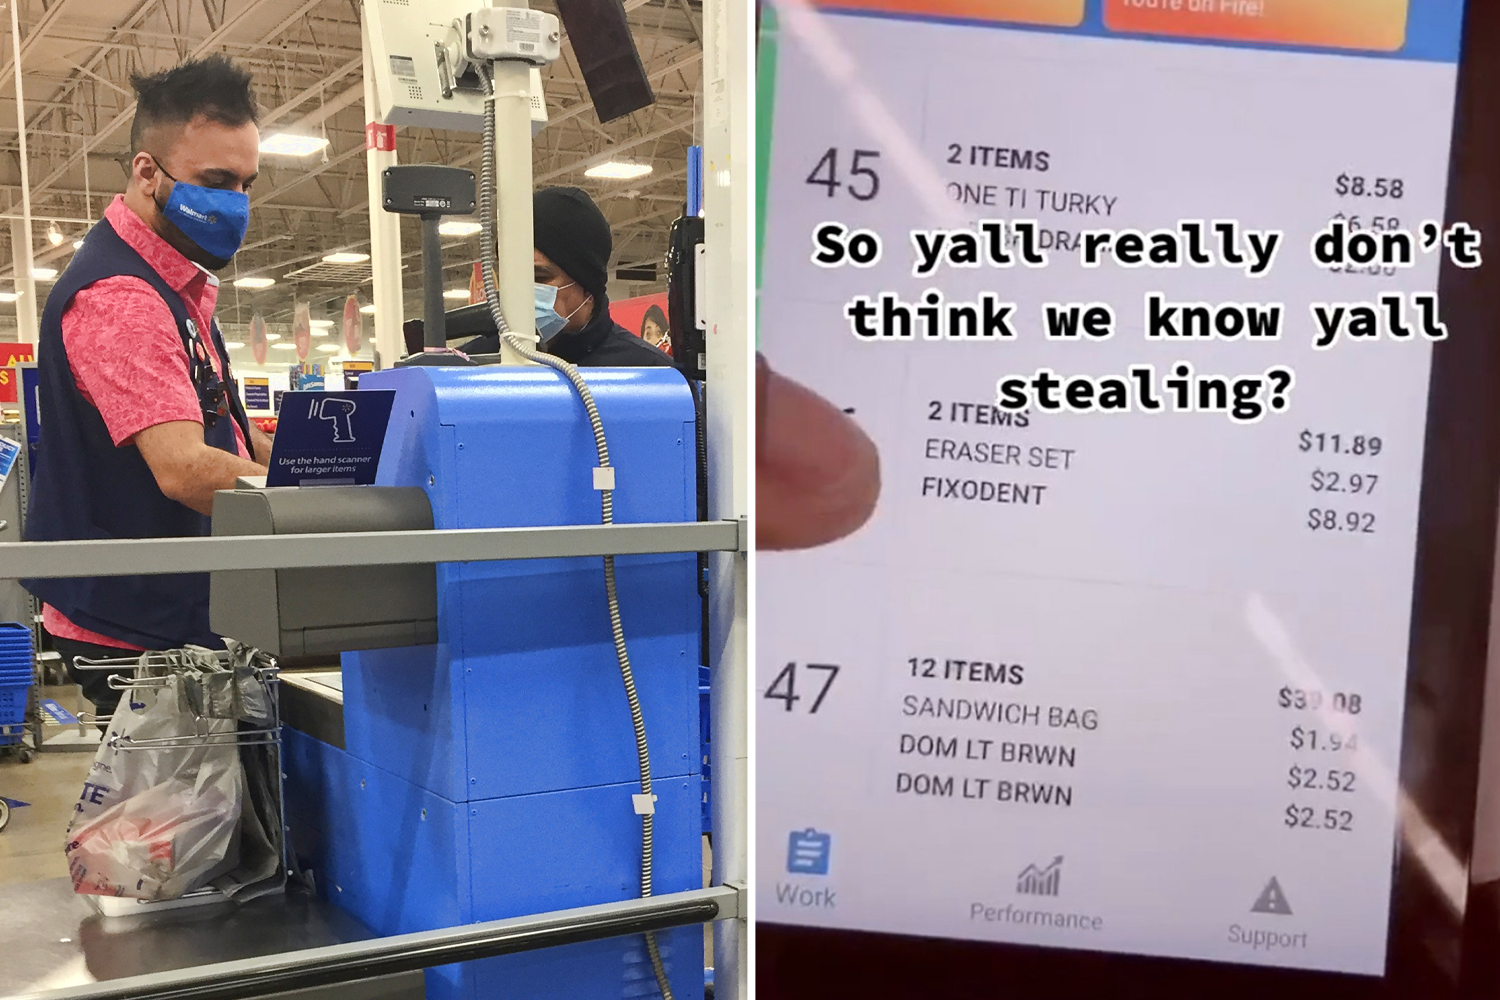 I work at Walmart - we aren’t dumb & always know if you steal using self-checkout